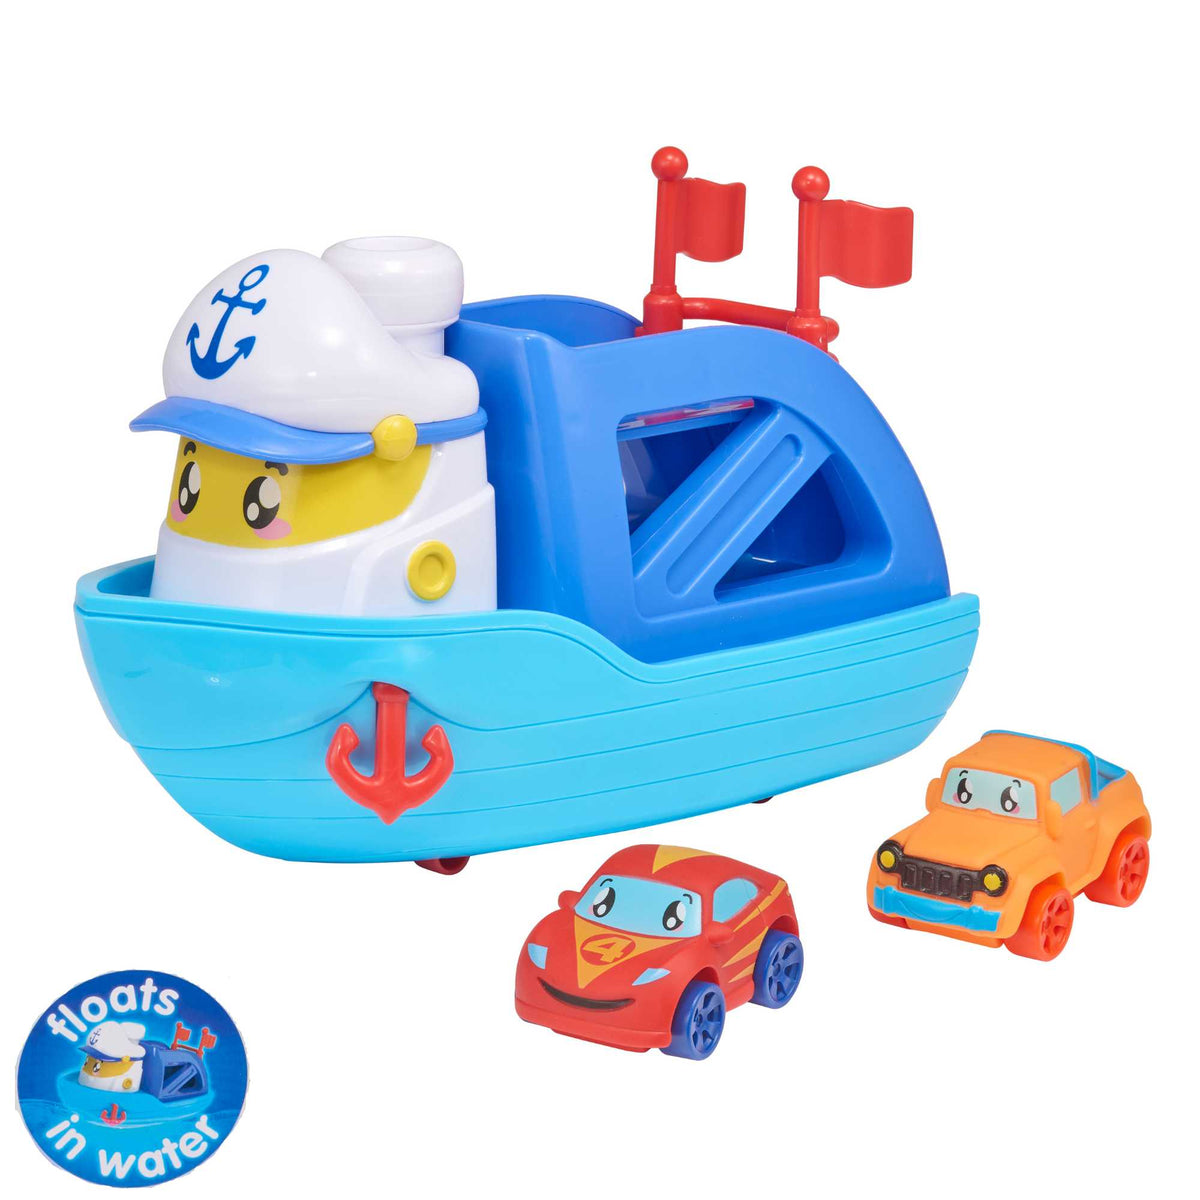 Tiny Teamsterz Ferry Boat Playset